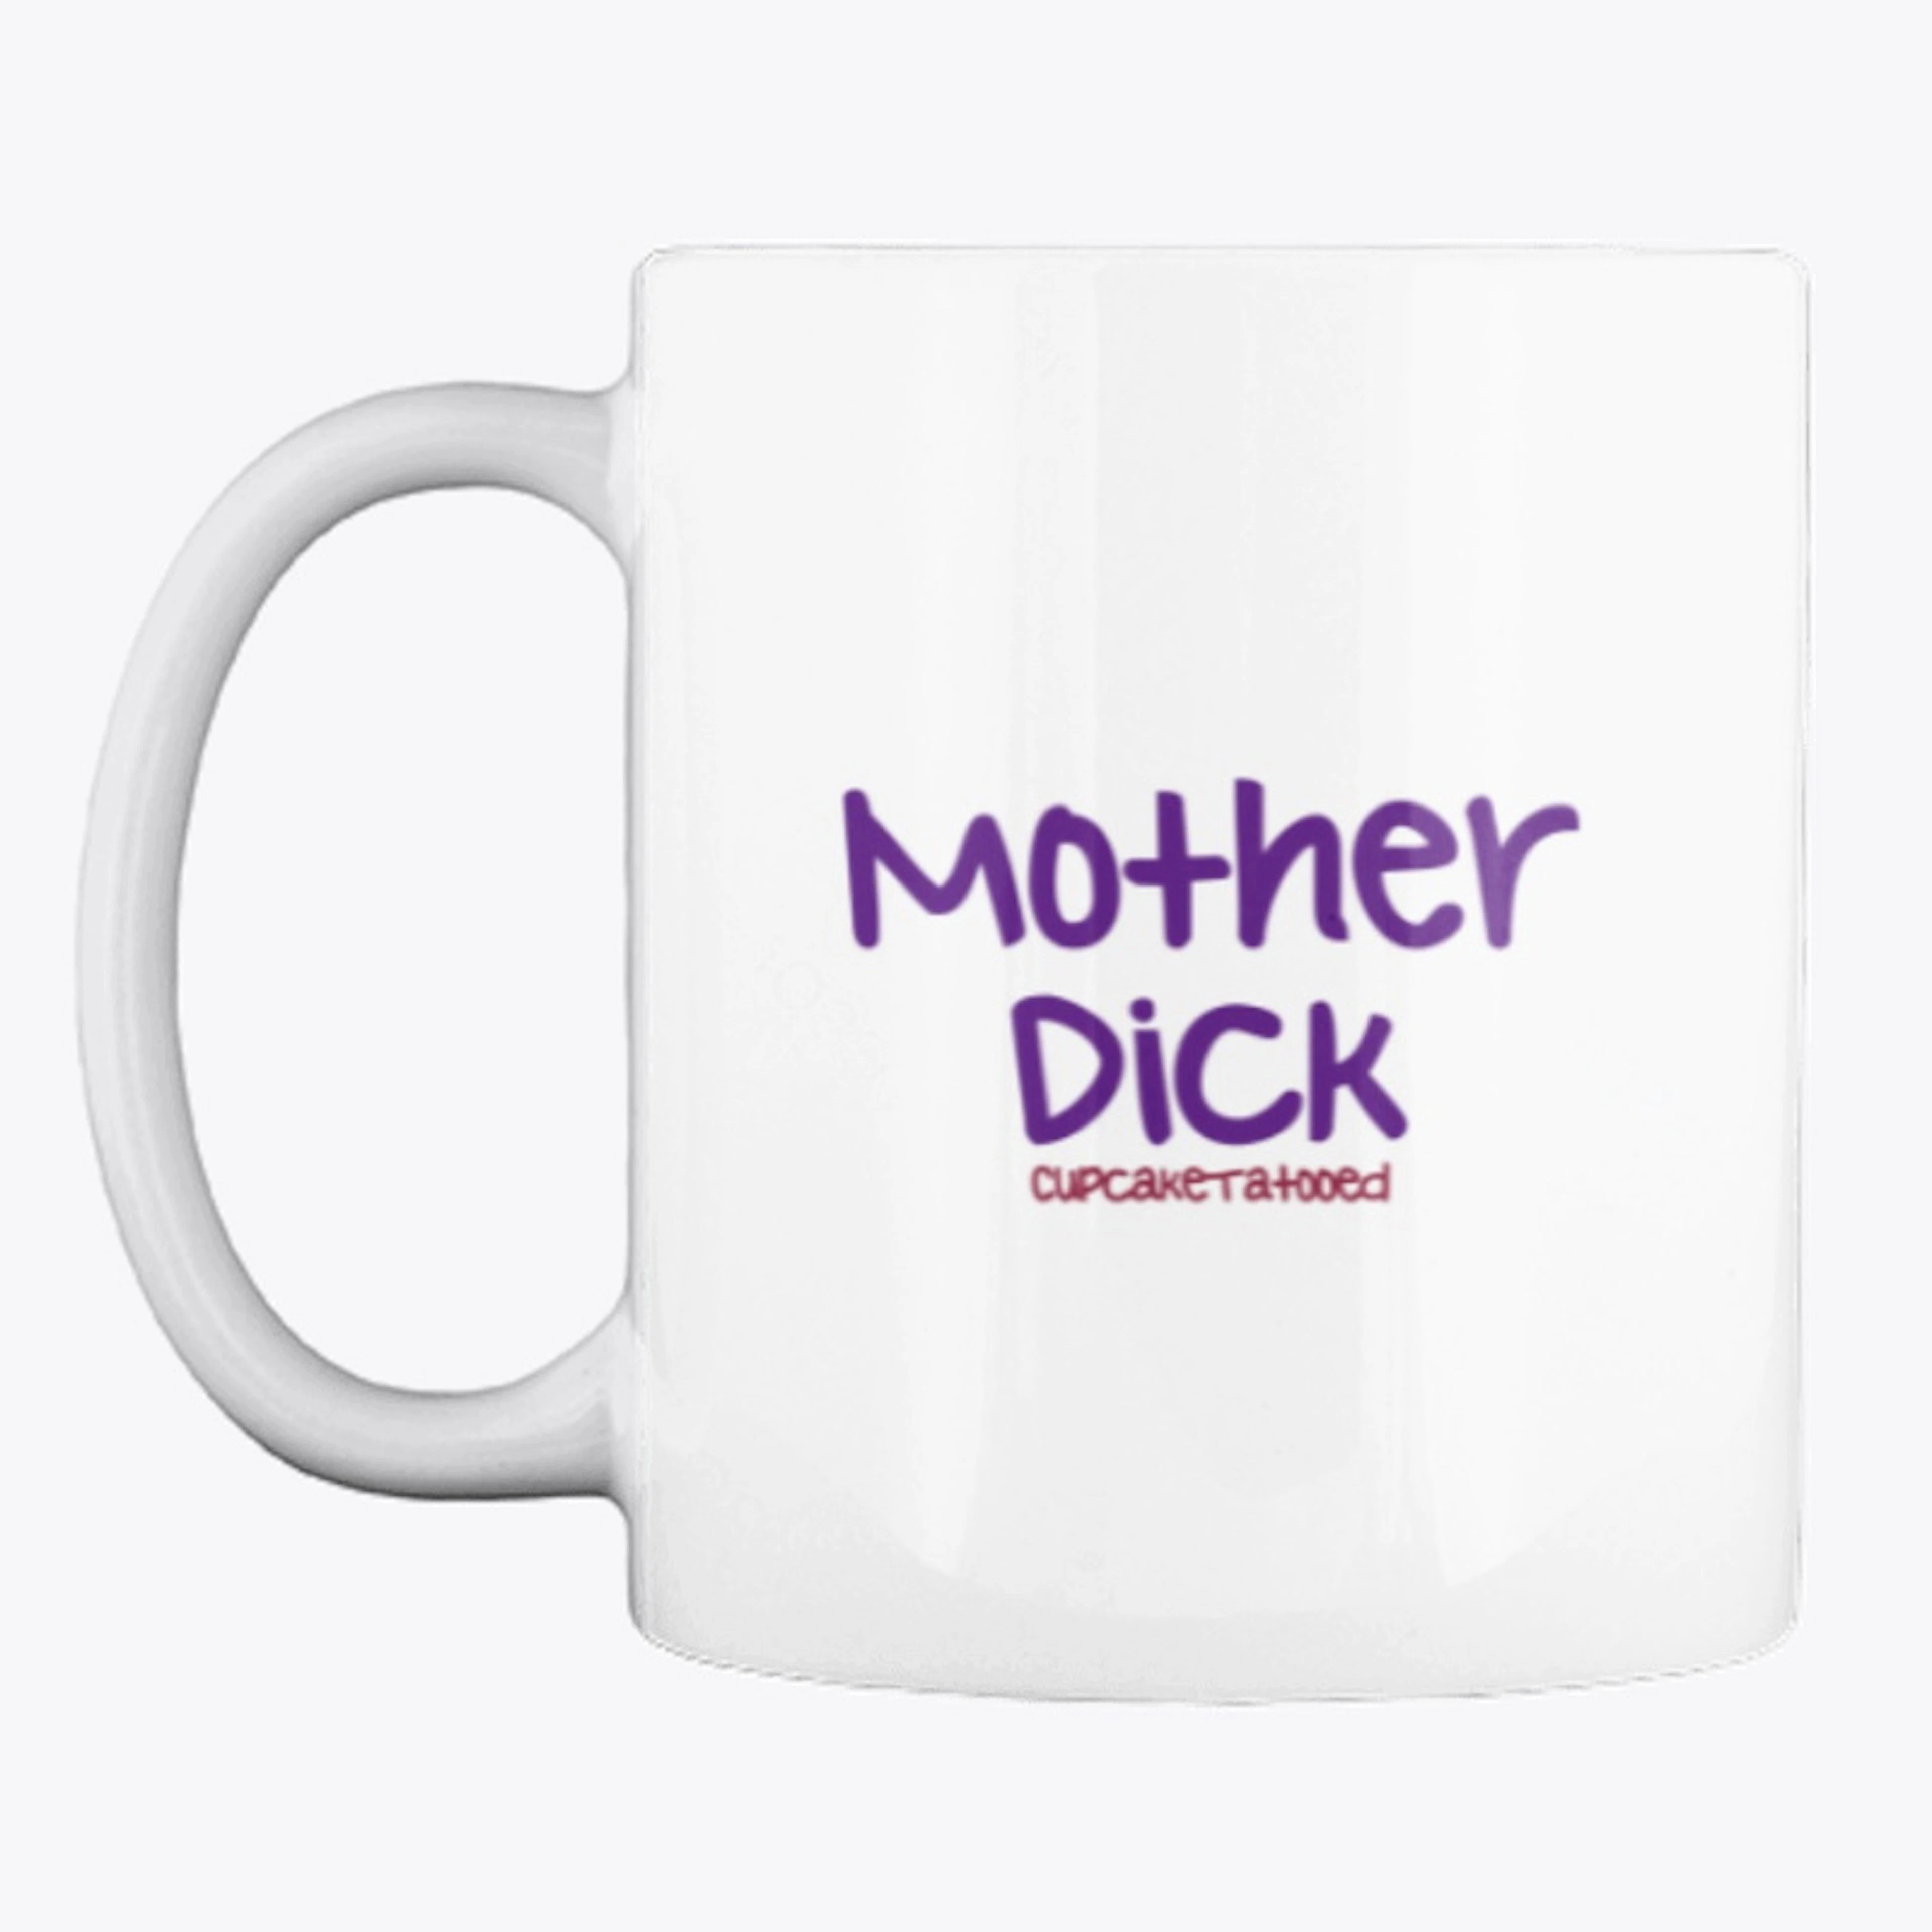 Mother Dick